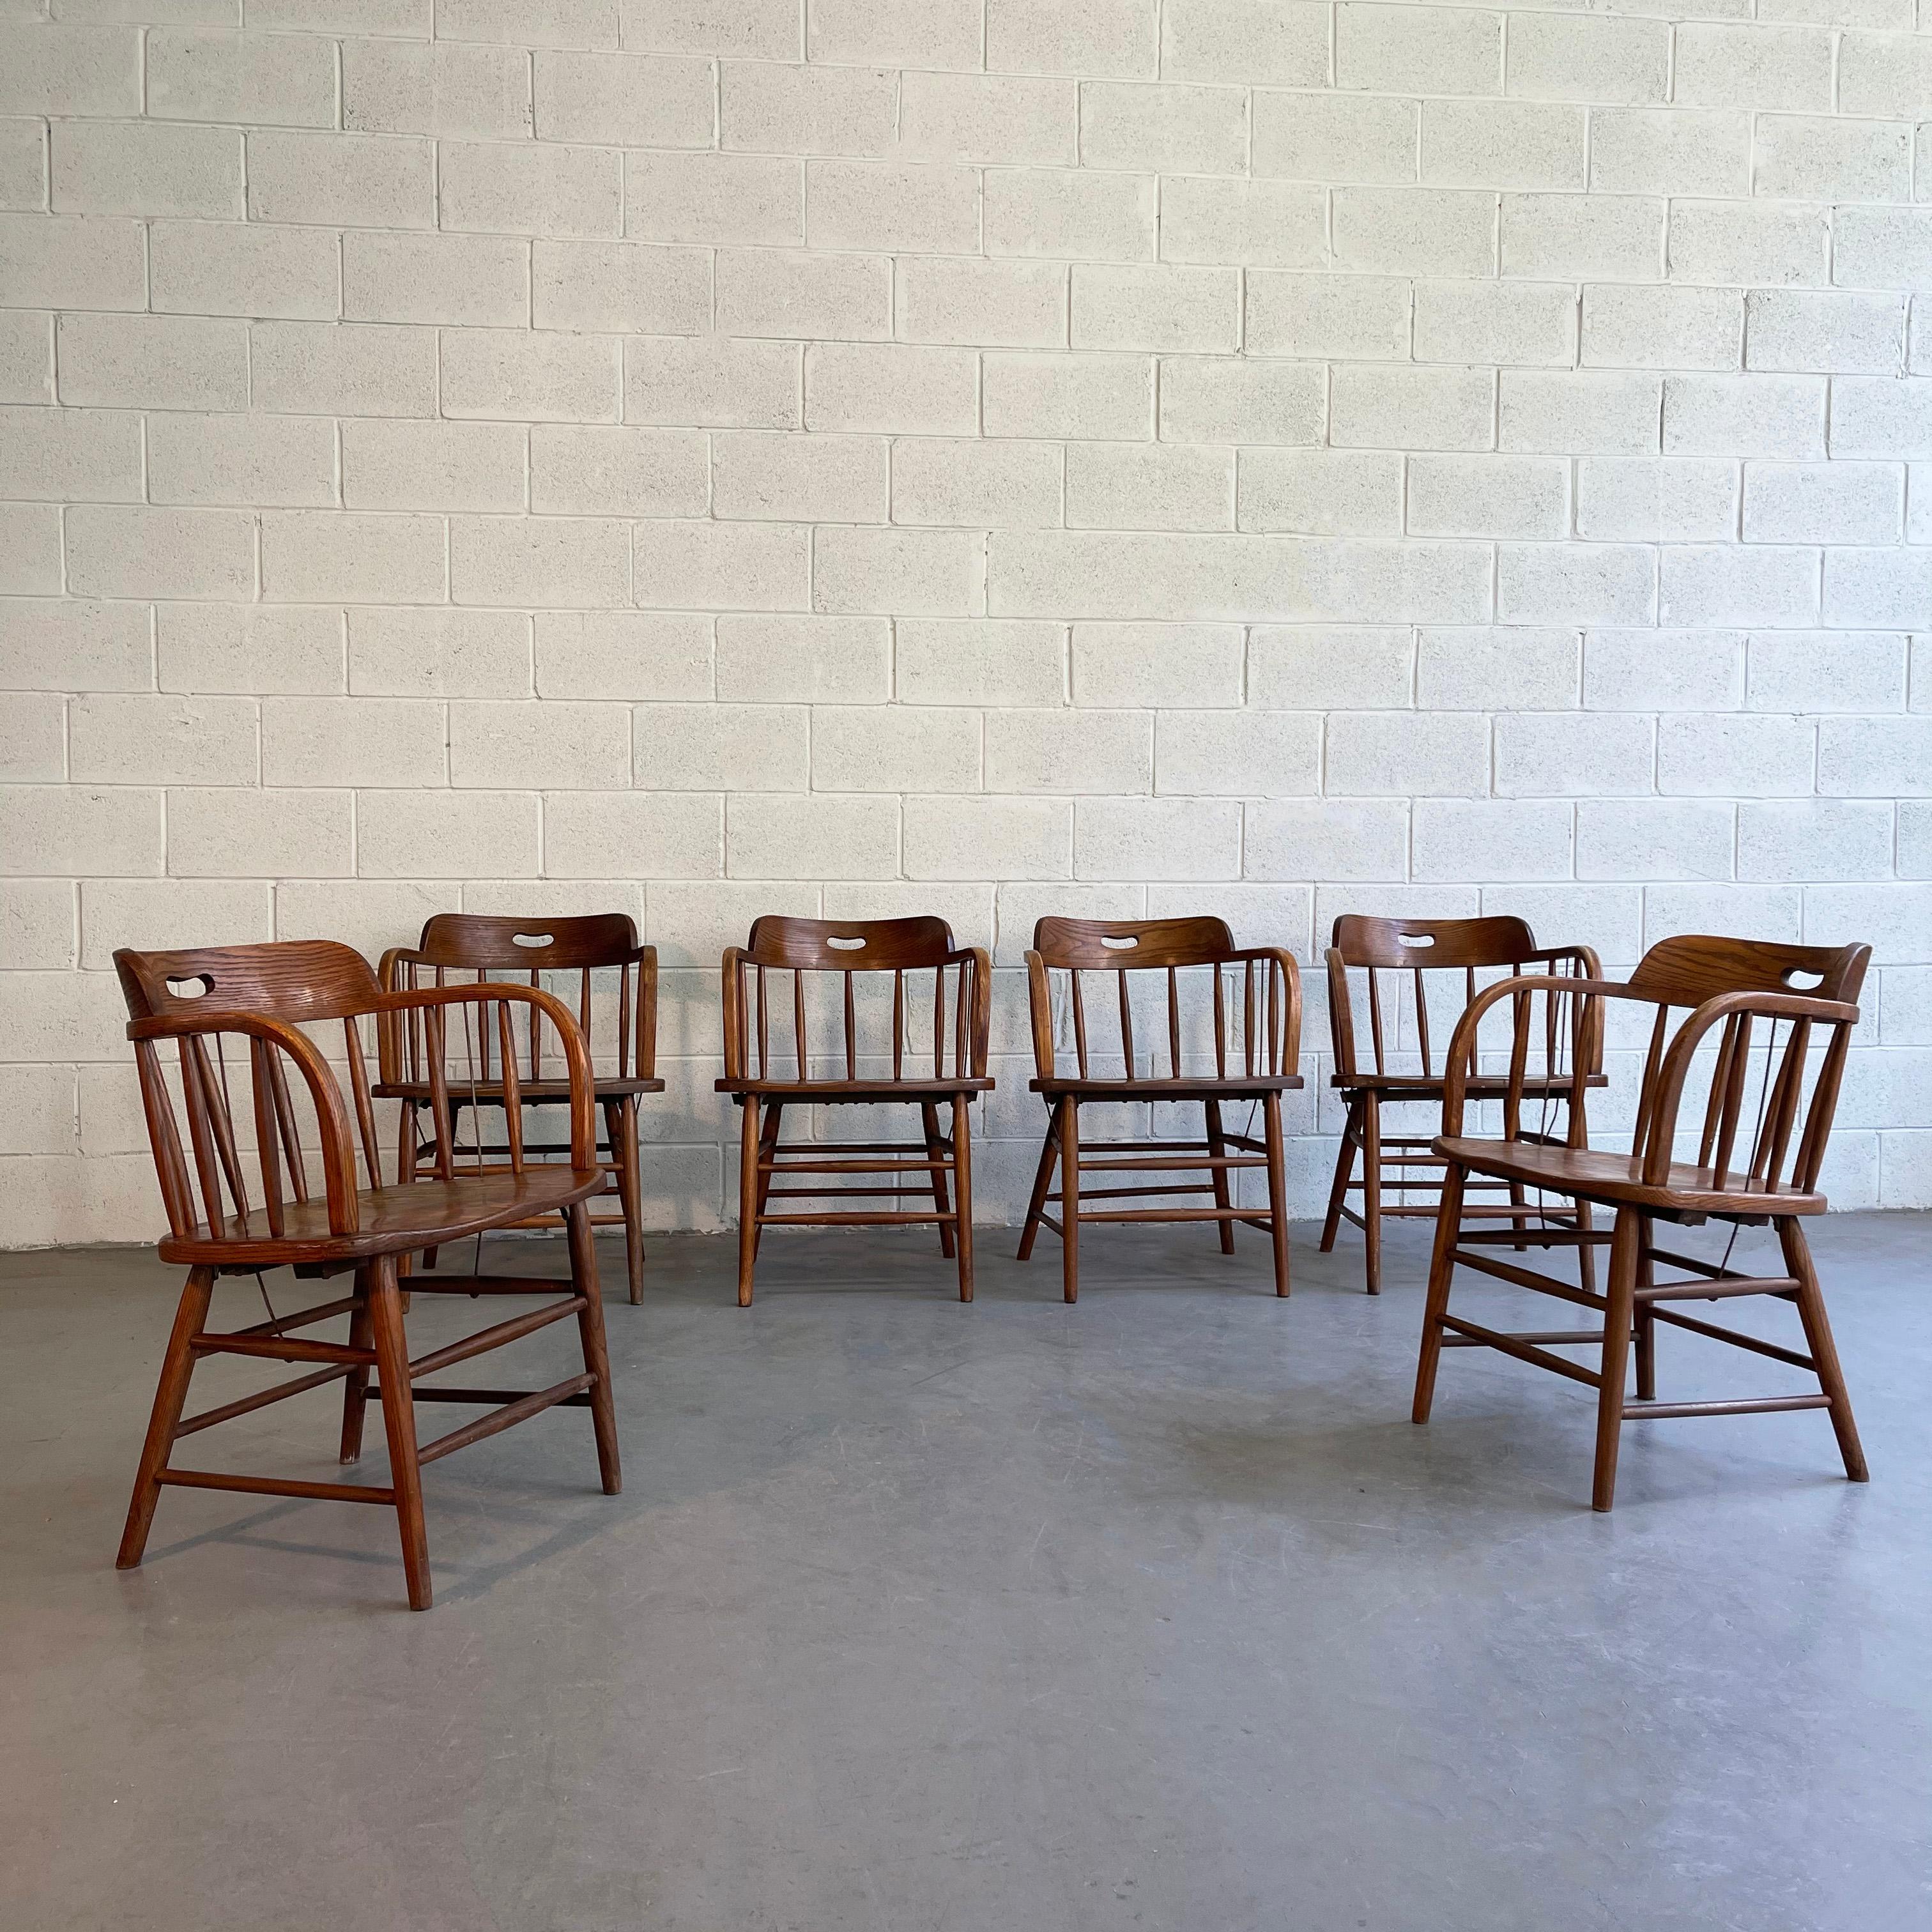 Set of six, Classic, 1940's, craftsman, oak, firehouse dining armchairs feature spindle backs and sides with metal reinforcement rods and wonderful oak grain throughout.